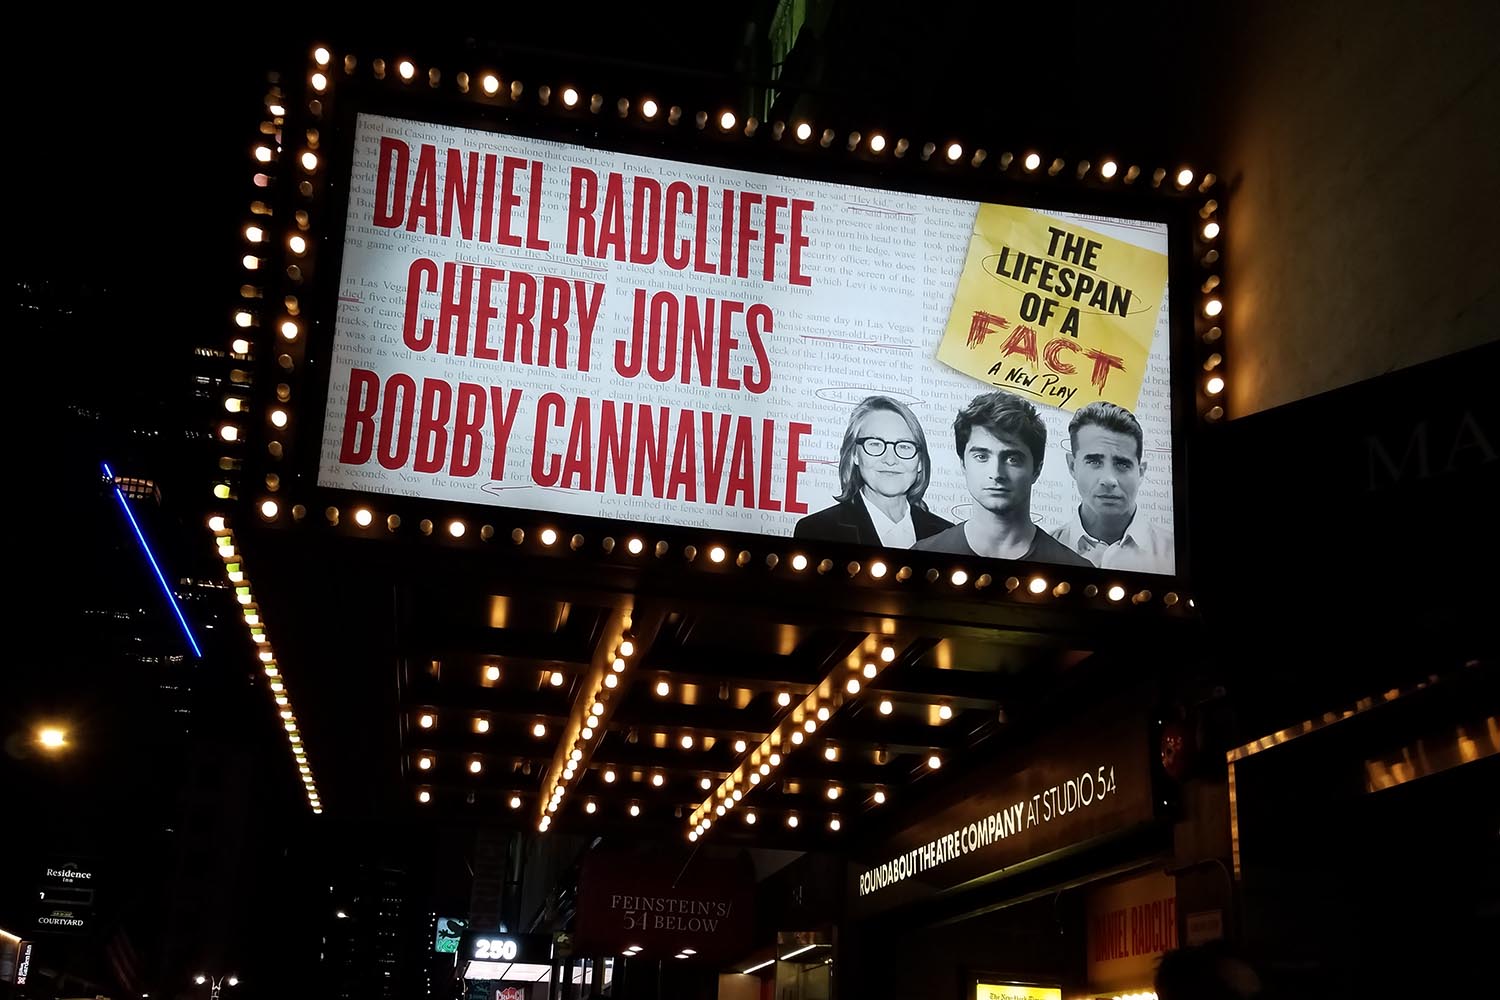  In Lifespan, actor Daniel Radcliffe is back on Broadway with Tony Award-winner Cherry Jones and Emmy Award-winner Bobby Cannavale as they take on the high-stakes world of publishing. 